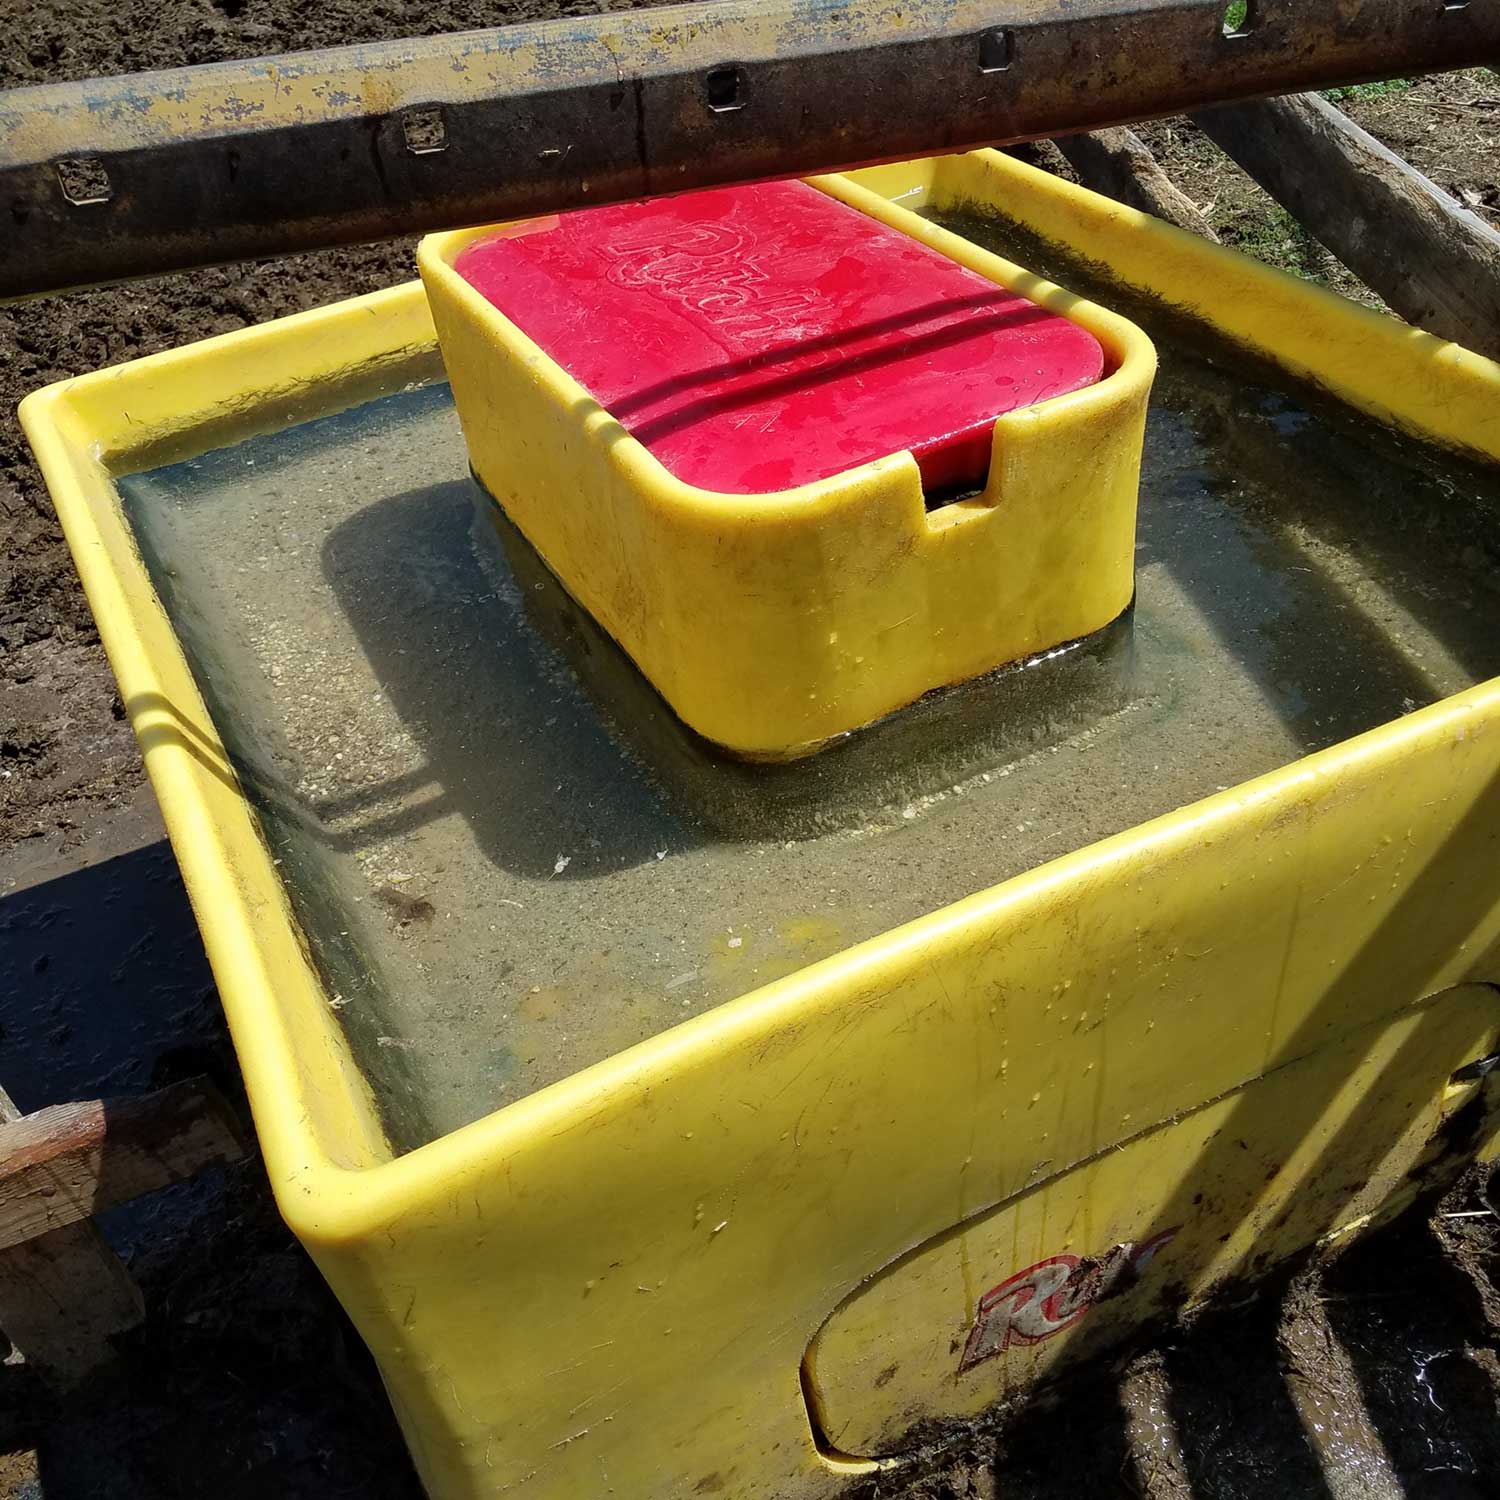 A large, yellow automatic cattle waterer installed in a feedlot.